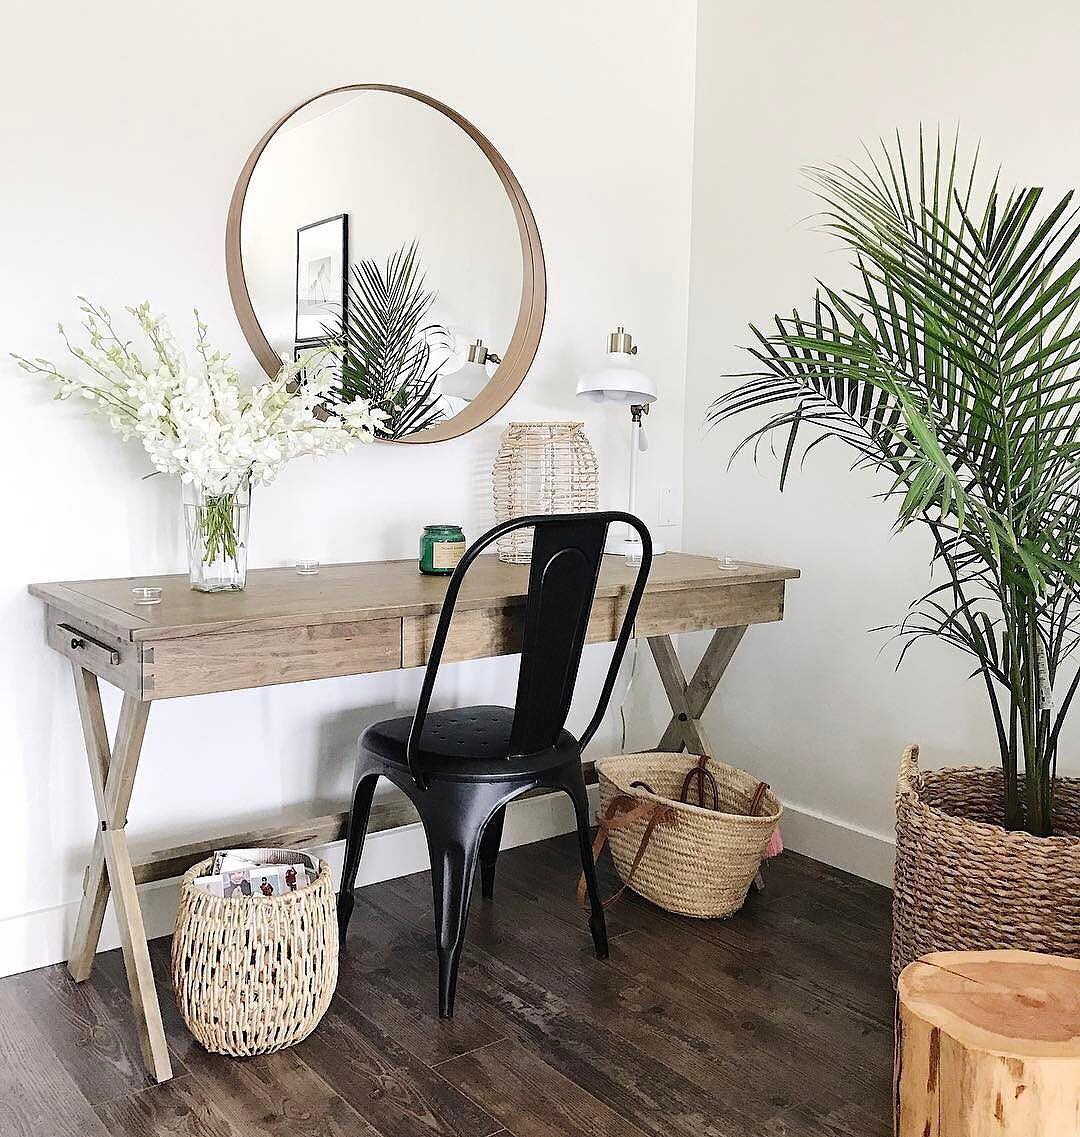 Top Modern Bohemian Decor Picks on Sale at World Market Right Now!